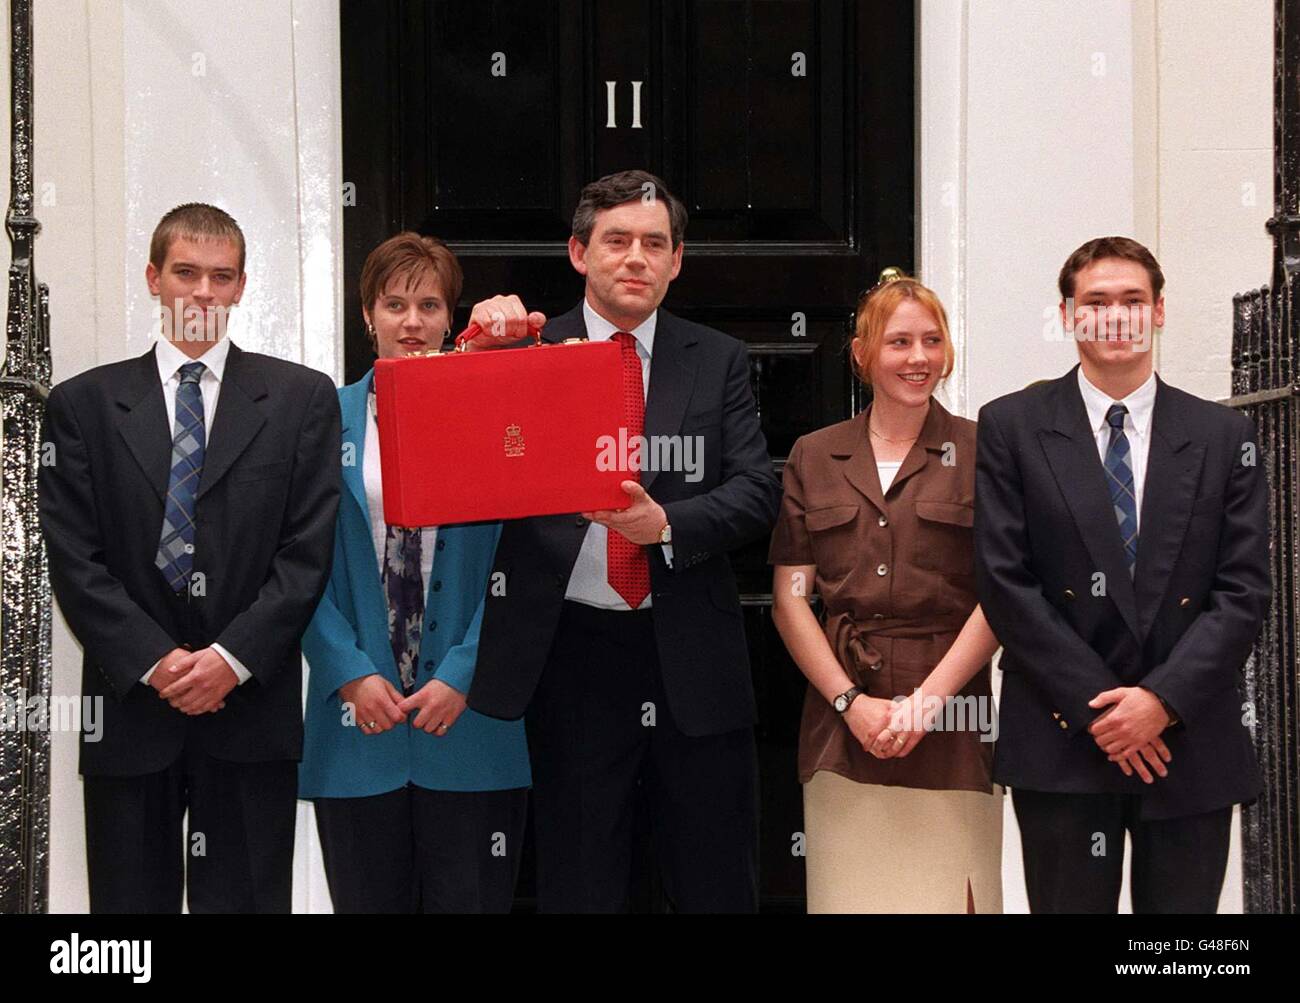 Chancellor Gordon Brown holds aloft the new Budget Box, as he leaves Downing Street today (Wednesday), before he announces the first Labour Budget in 18 years, in the House of Commons. Pictured with the Chancellor are second year apprentices of Babcock Royal Dockyard in Rosyth (l/r) Craig Miller, Leona Reid, Eileen Mallan and Eric Axford, who made the new box. Photo by David Giles. See PA Story COMMONS Budget. Stock Photo